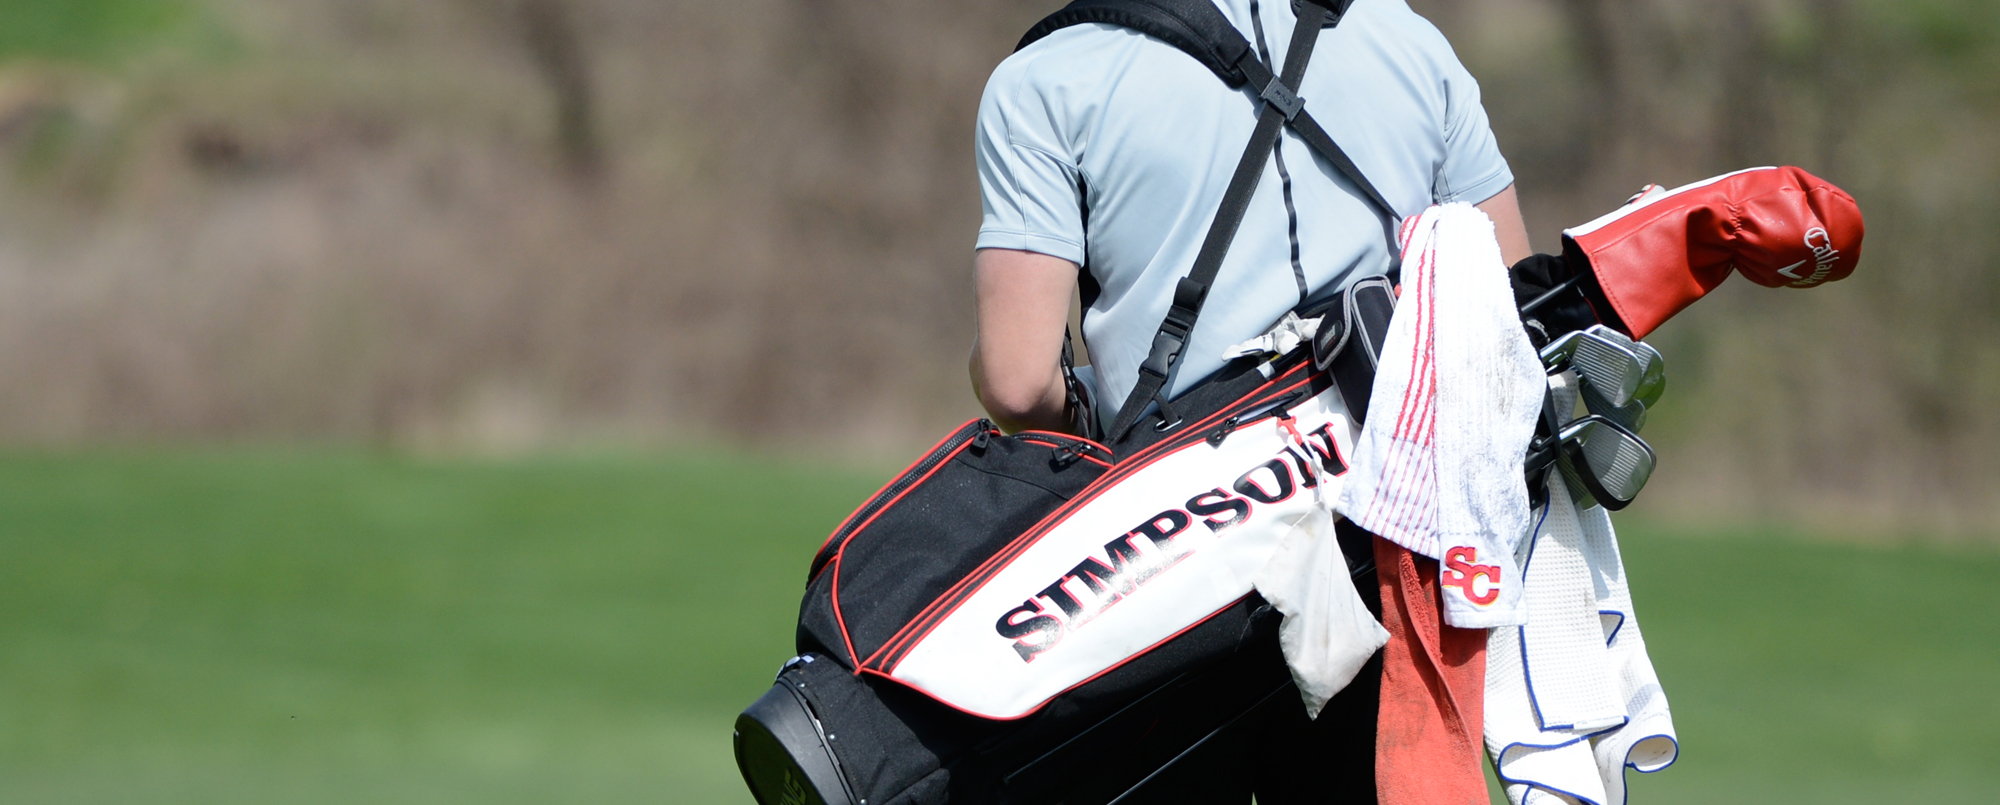 Storm tied for 18th after first day at Midwest Region Classic